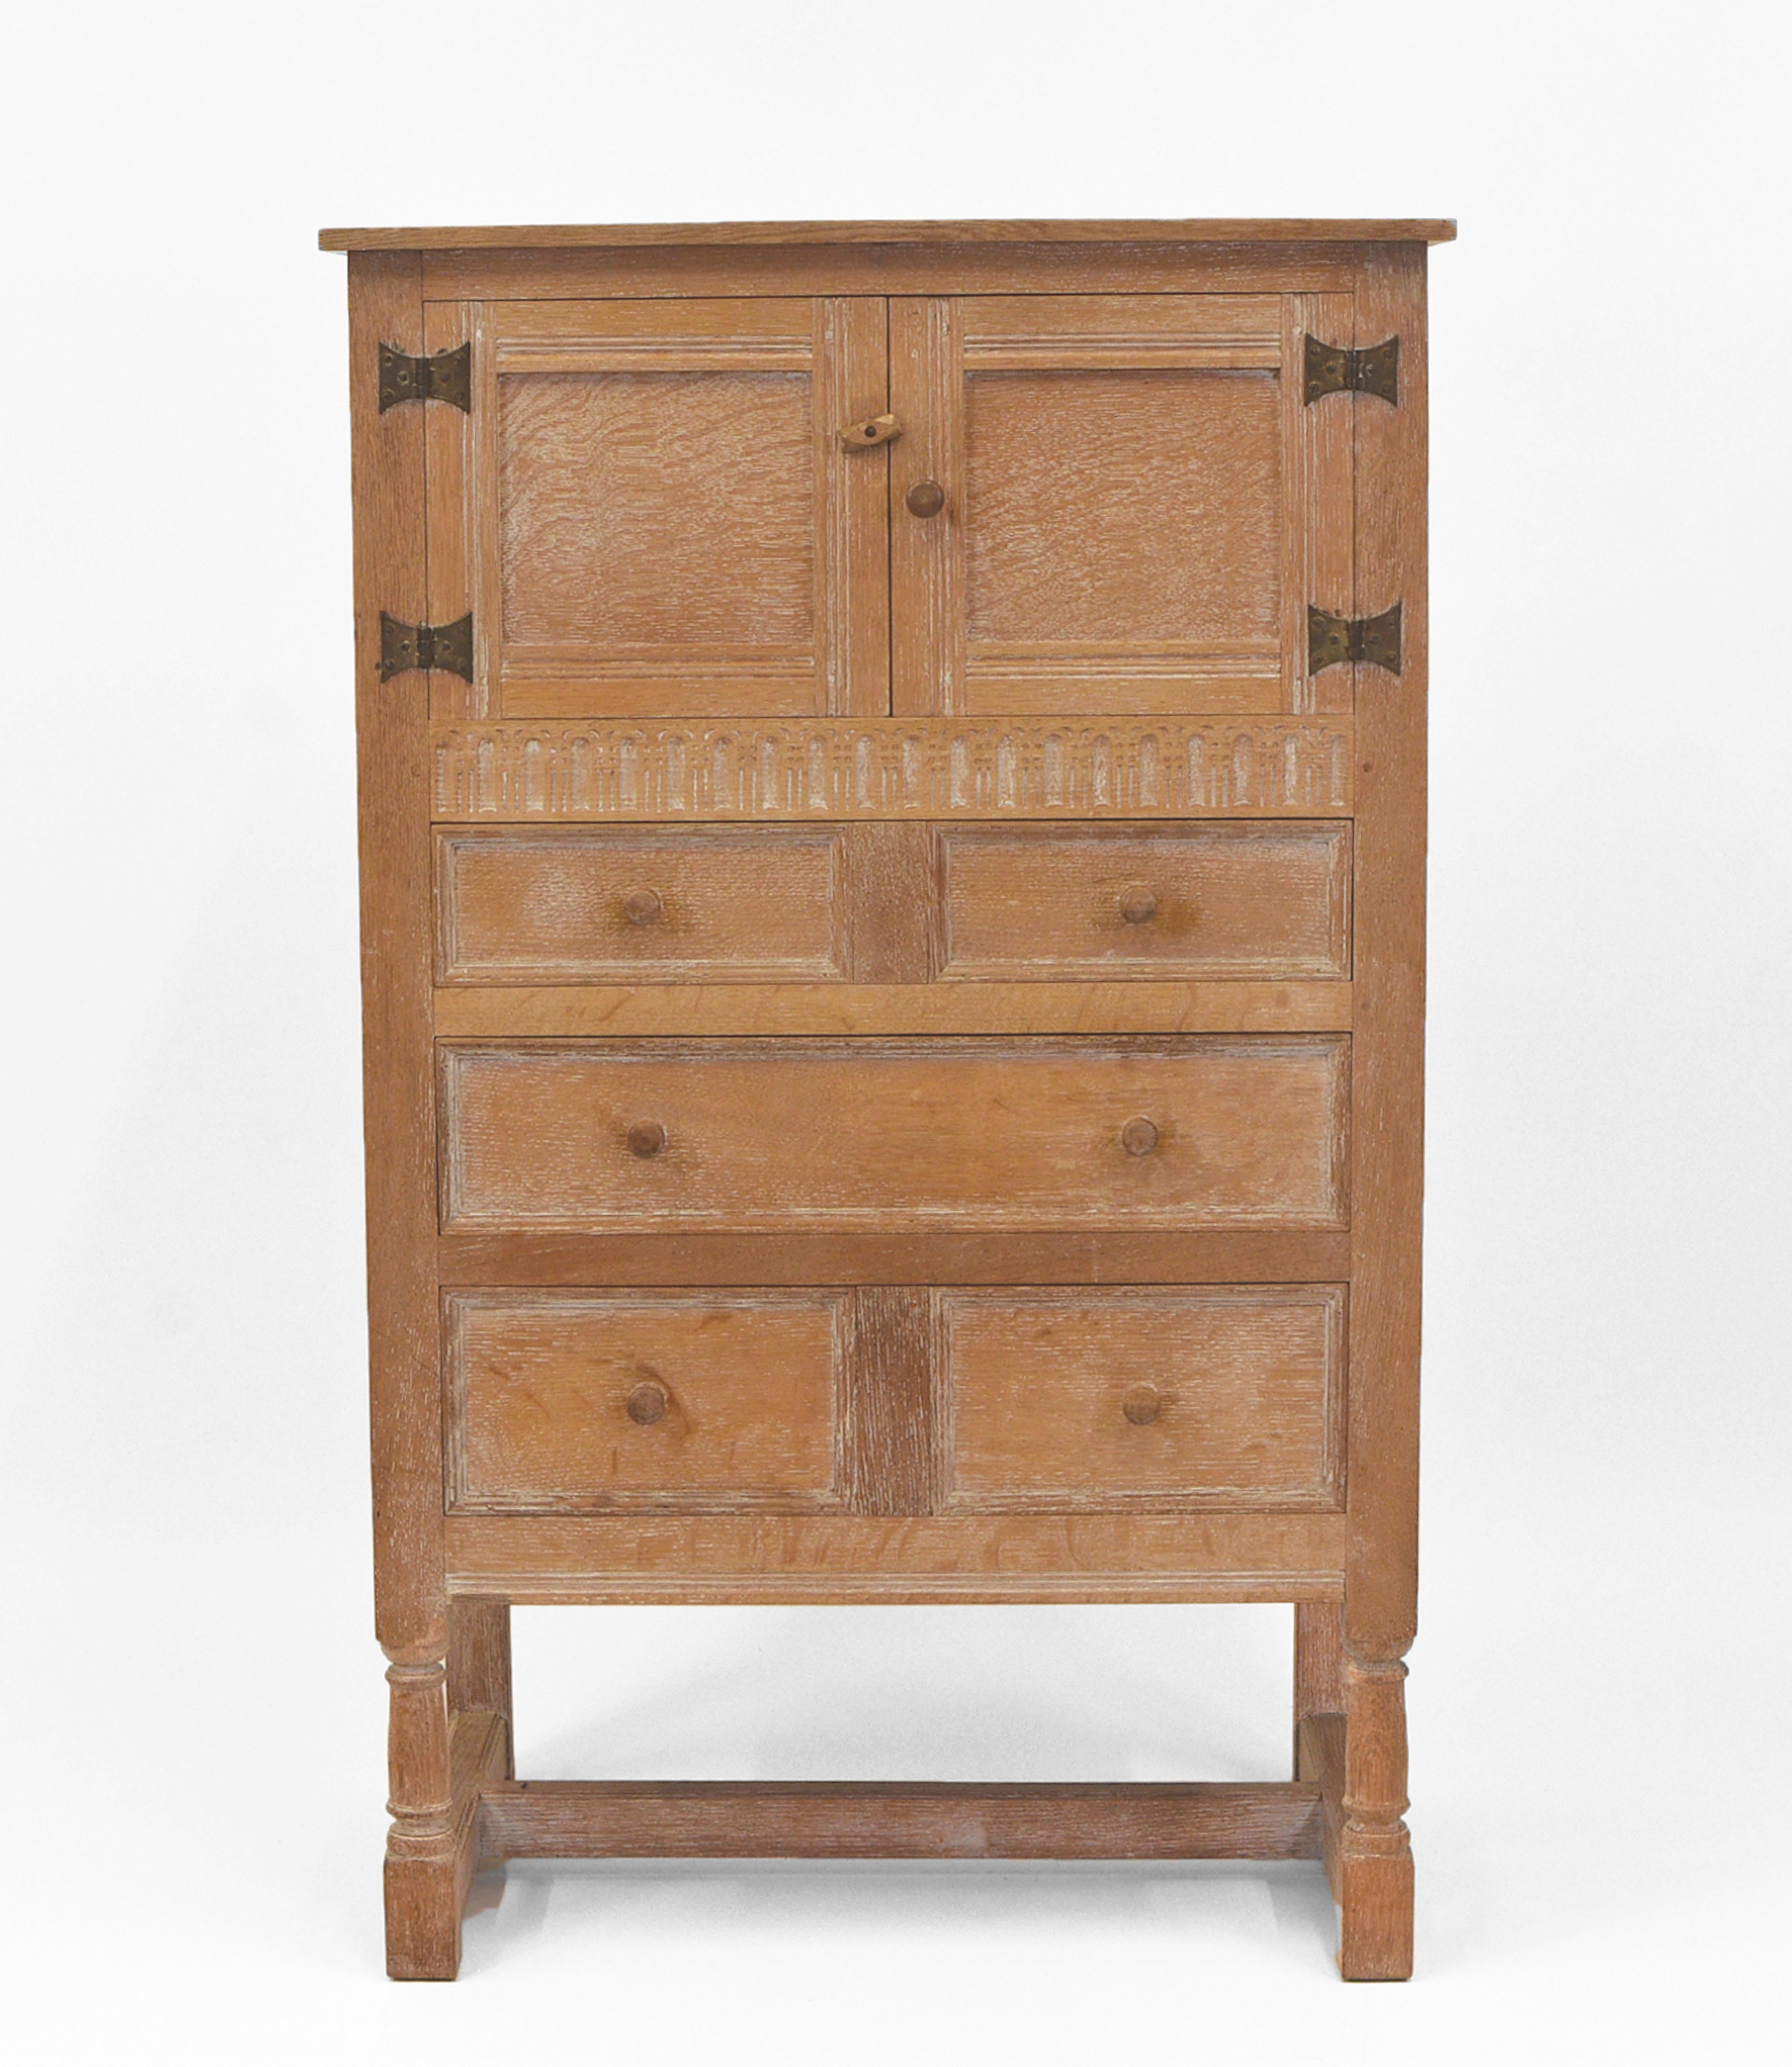 Limed oak tallboy/cabinet of good proportions by Heal & Son. Circa late 1930's.

Superbly made, with each join having dowel construction. Single band carved decoration and forged iron exposed cabinet door hinges. Made in solid oak with inner